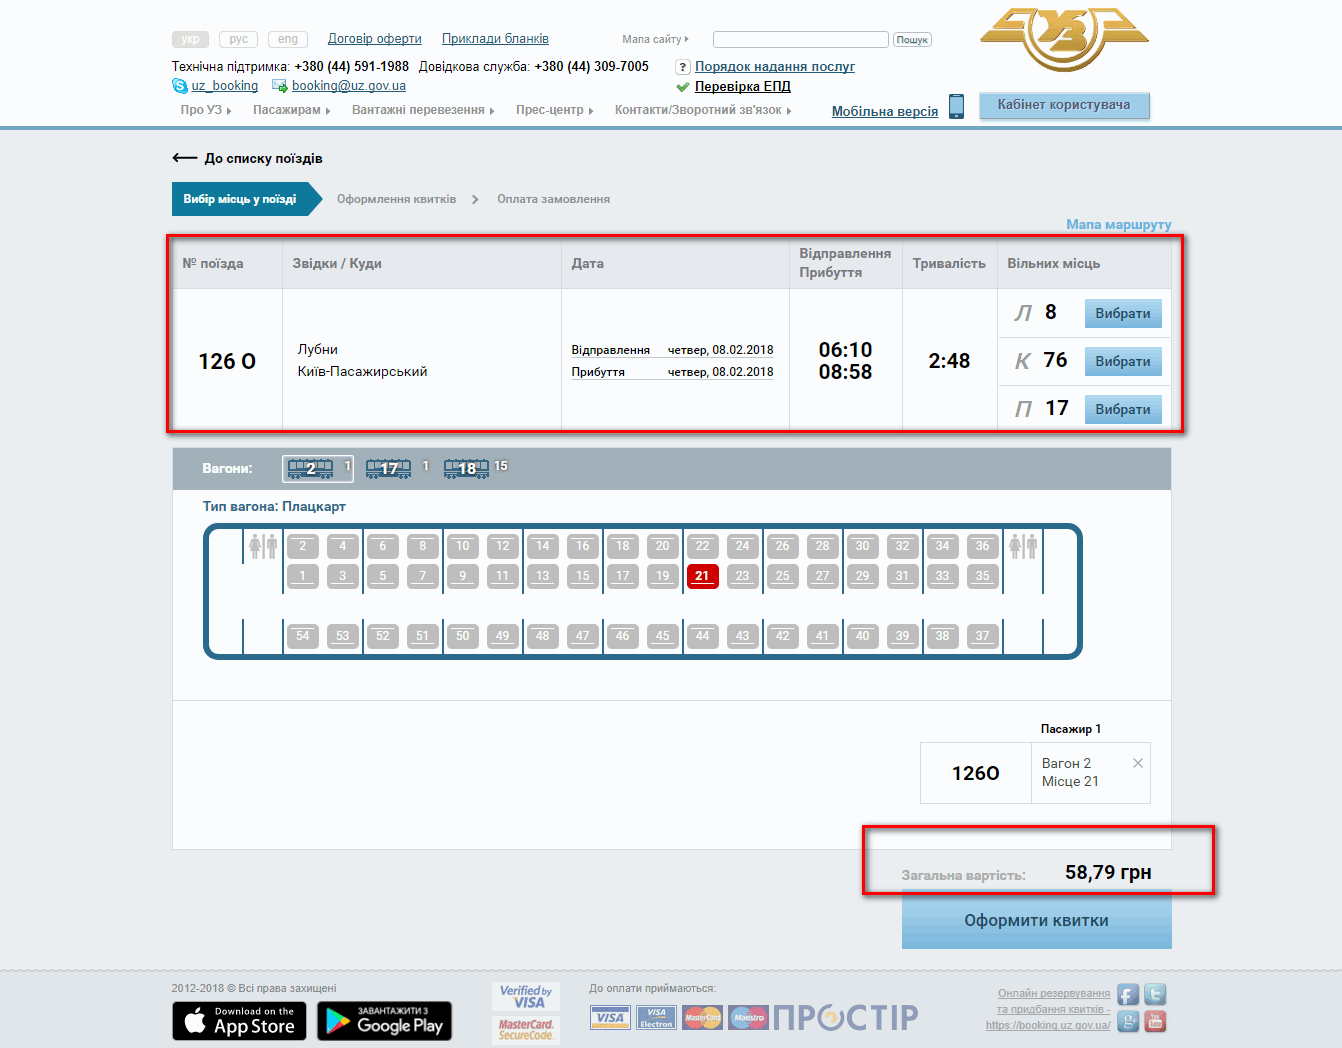 https://booking.uz.gov.ua/?from=2204560&to=2200001&date=2018-02-08&time=00%3A00&another_ec=0&train=126%D0%9E&wagon_type_id=%D0%9F&wagon_num=2&url=train-wagons